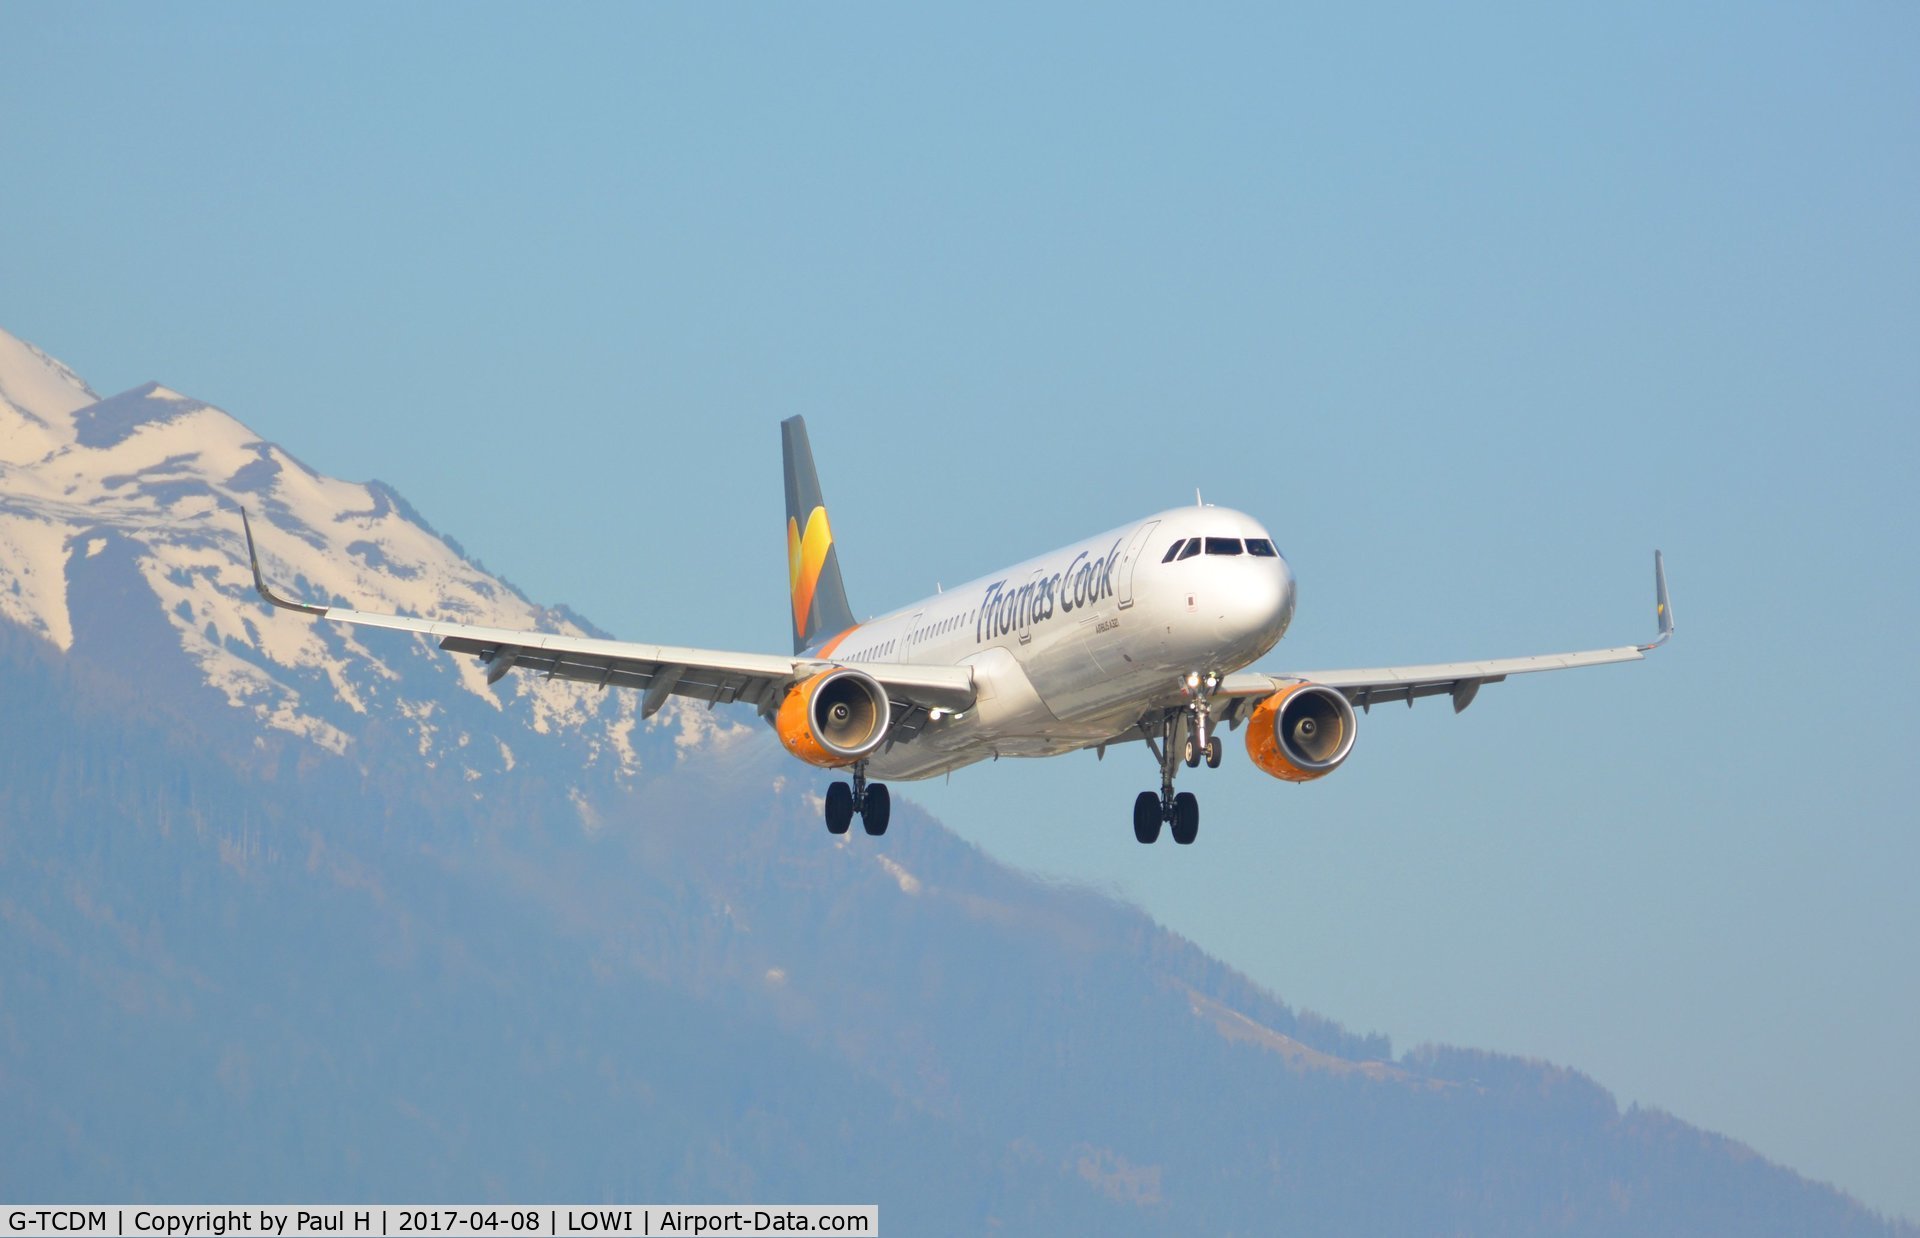 G-TCDM, 2016 Airbus A321-211 C/N 7003, Landing at LOWI with the austrian alps in the background